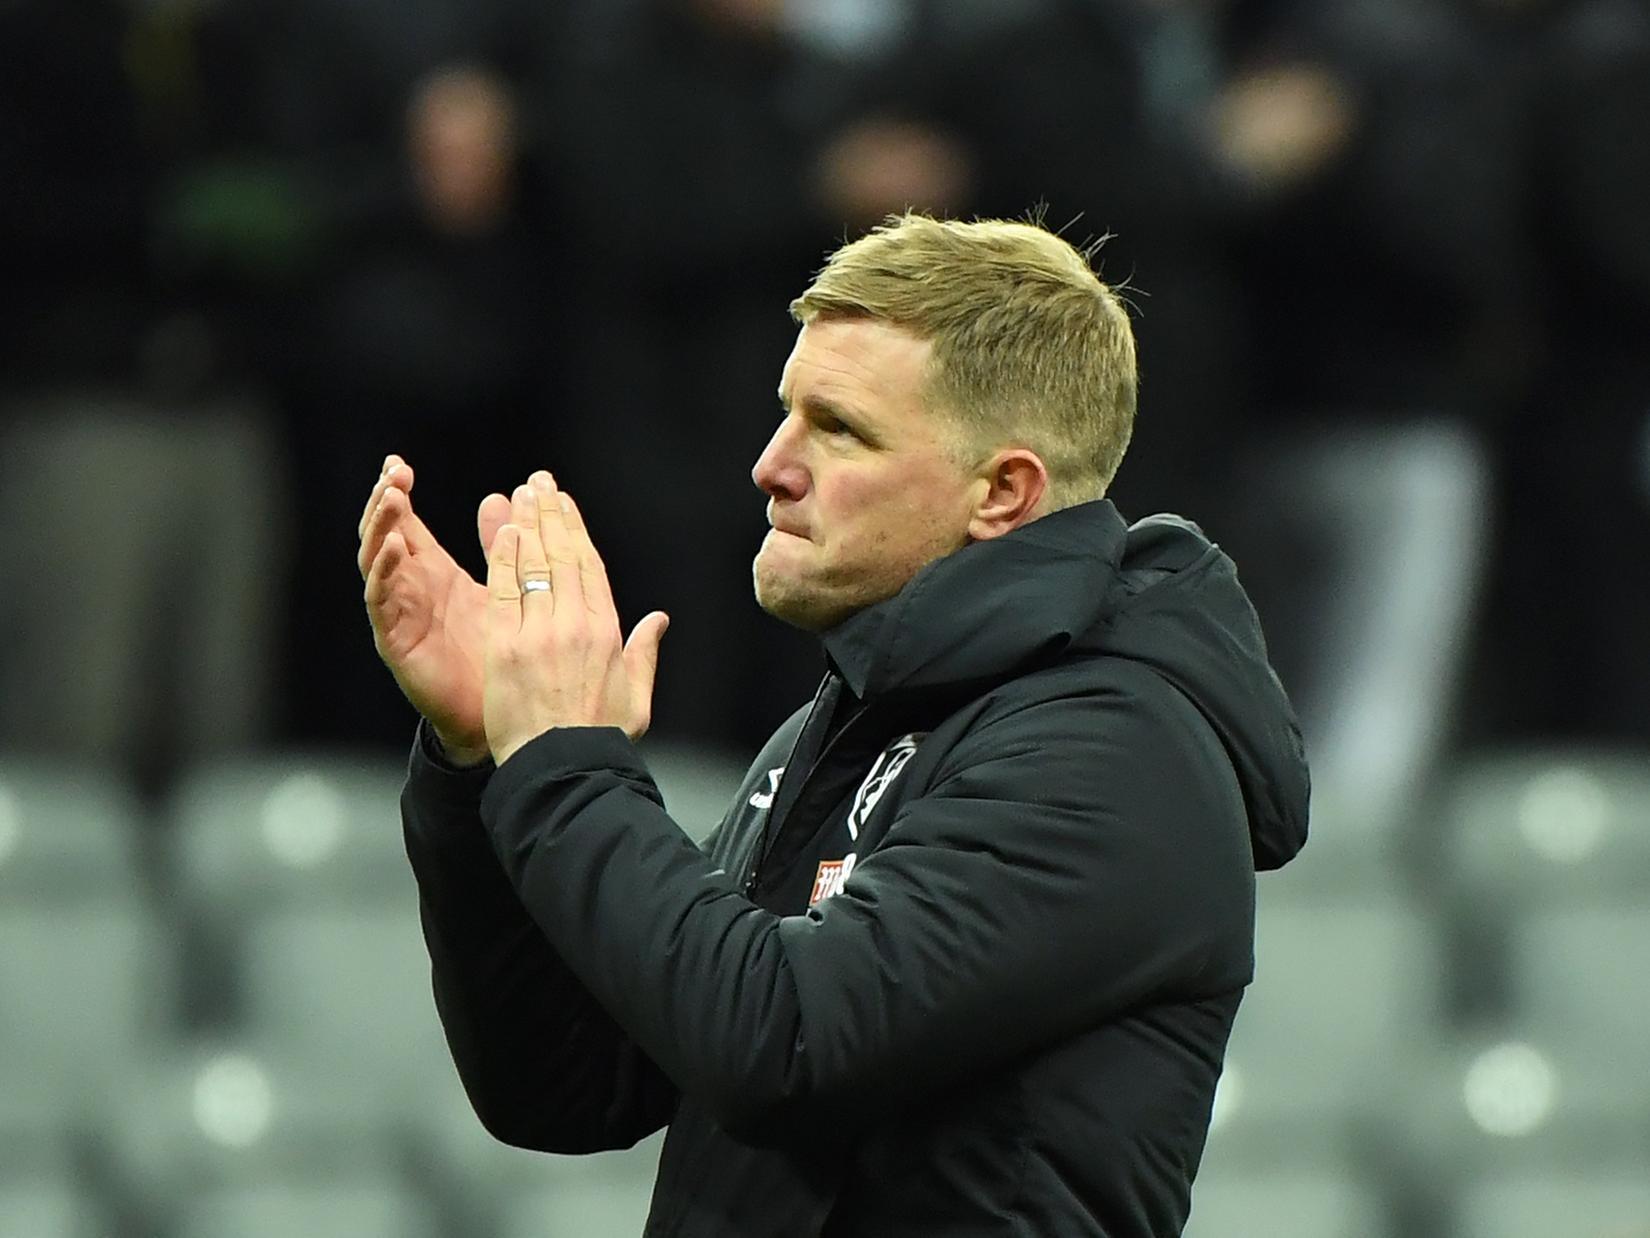 The AFC Bournemouth boss is the longest-standing manager in the Premier League at present and he won't be pushed from his post anytime soon. The Cherries are ninth, just a point behind fifth.